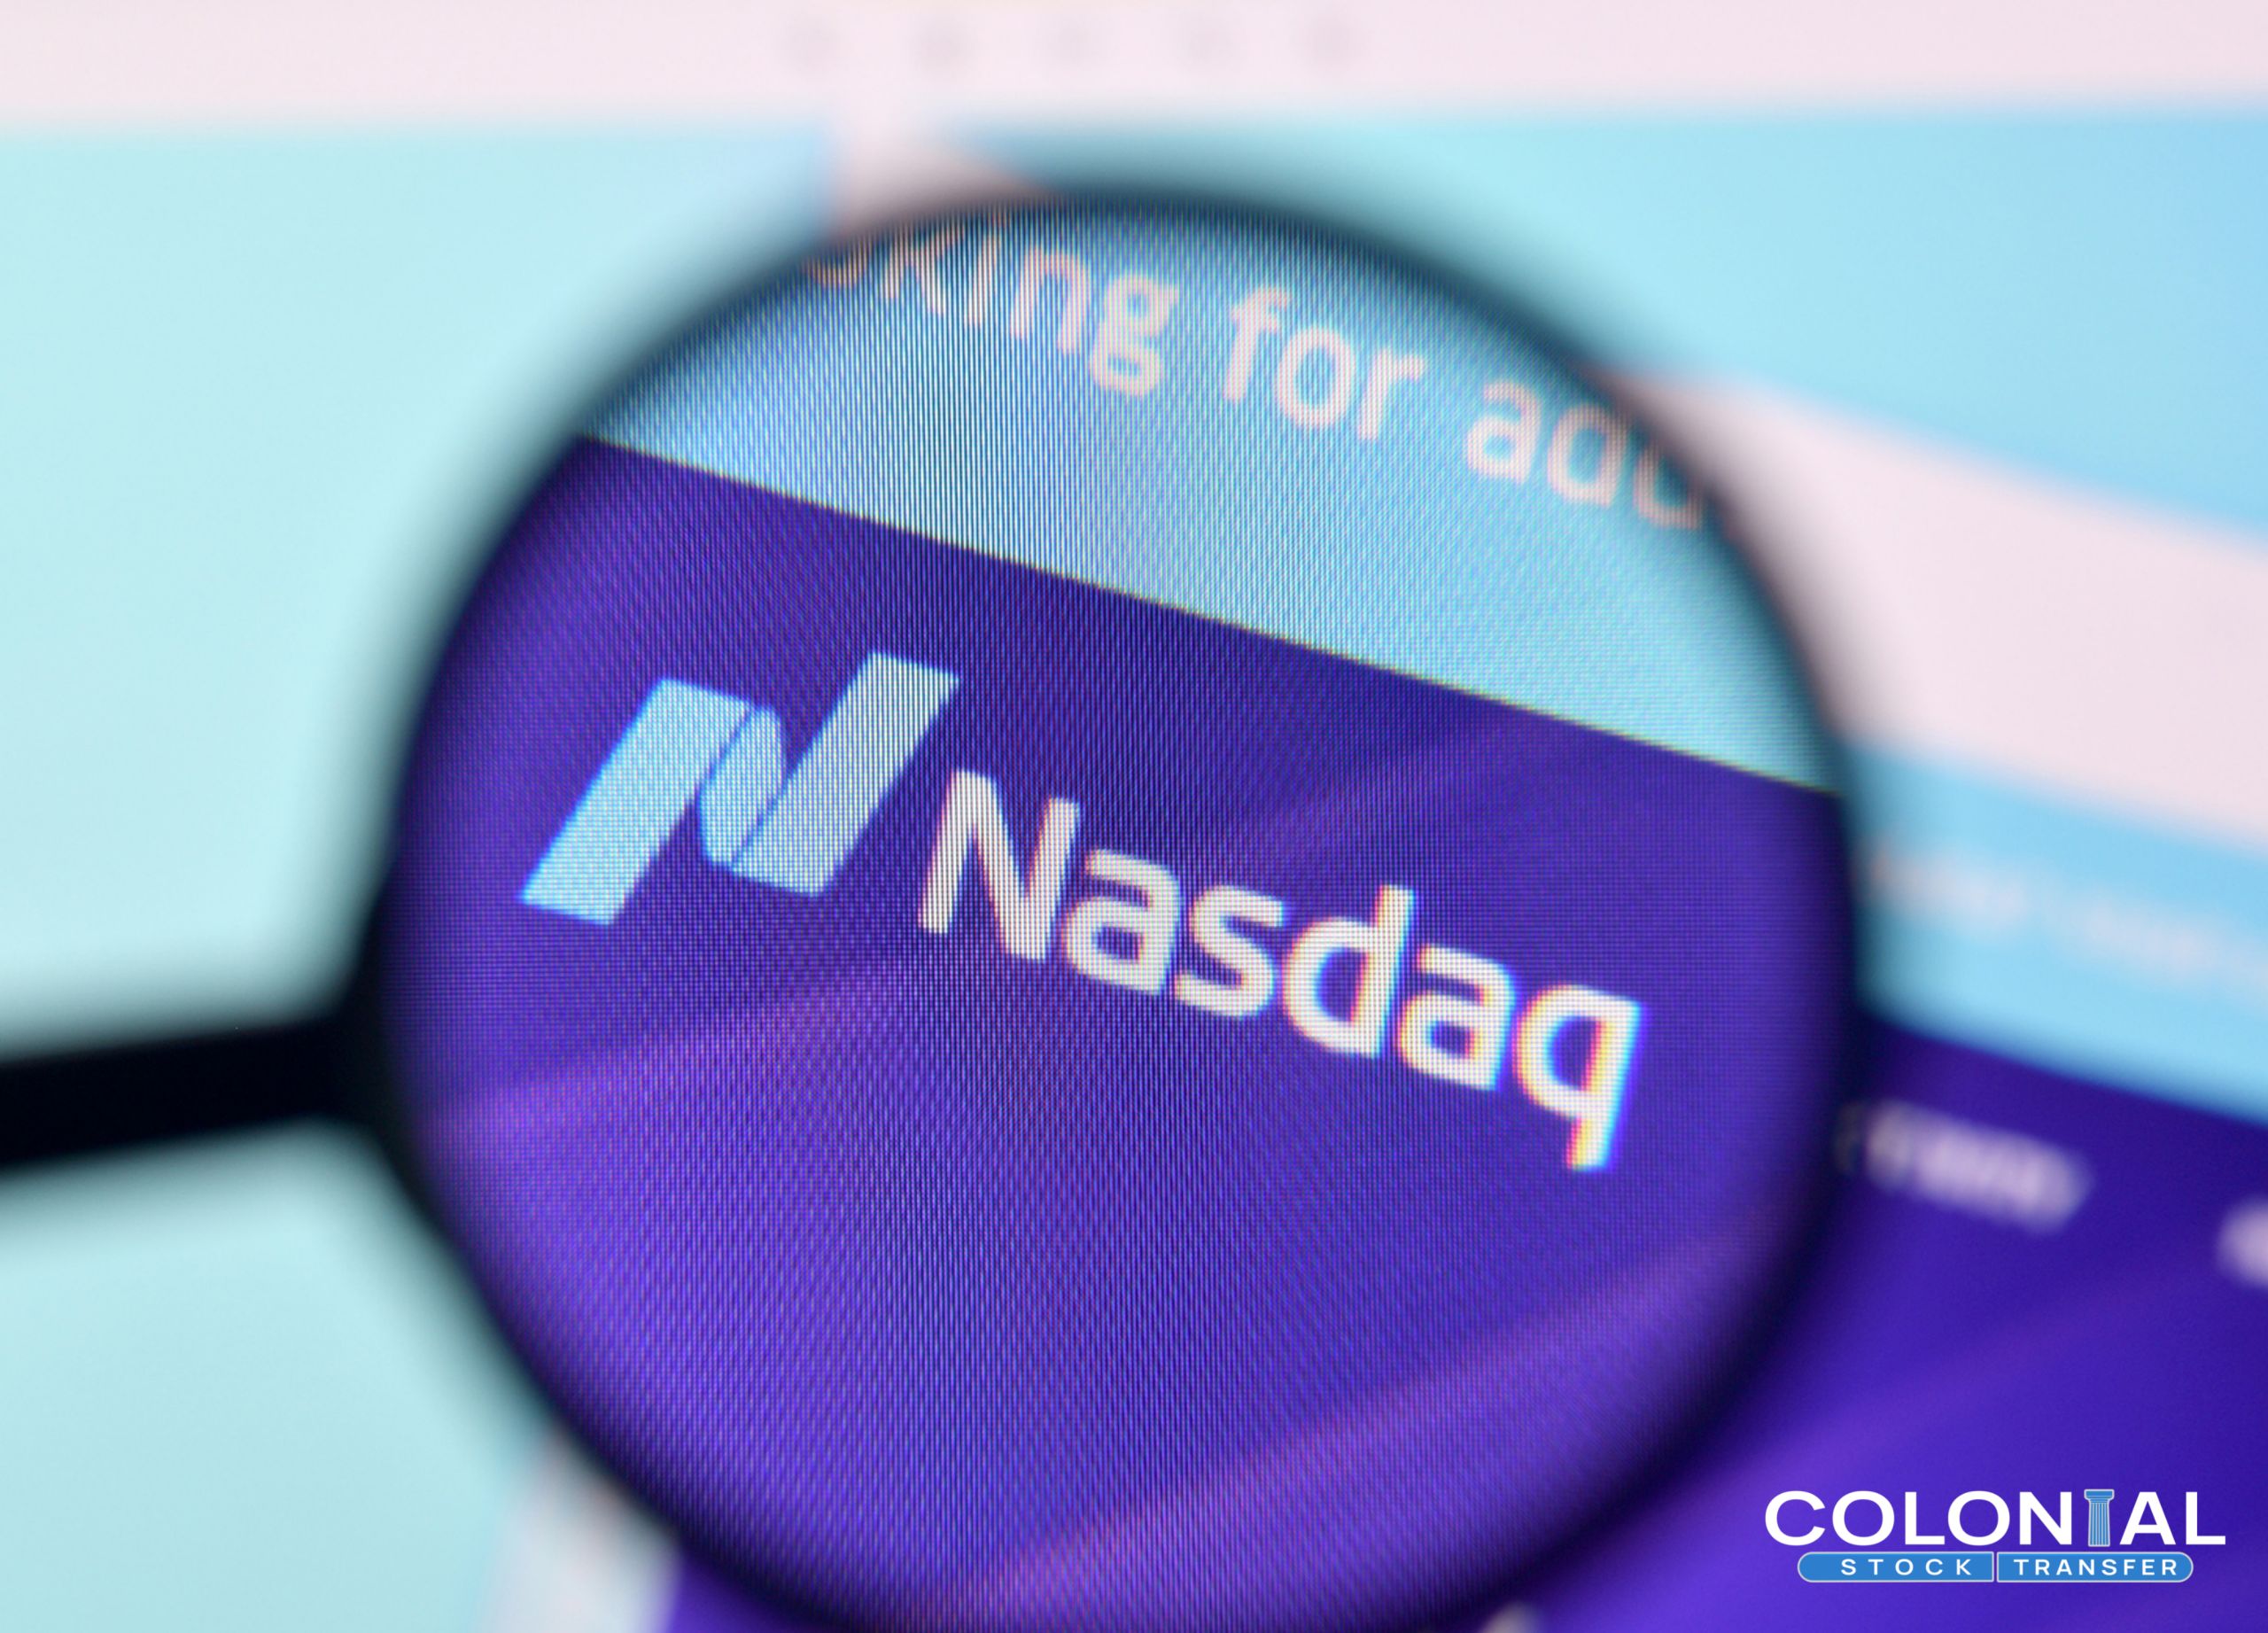 An Overview of the Nasdaq Updated LAS Form